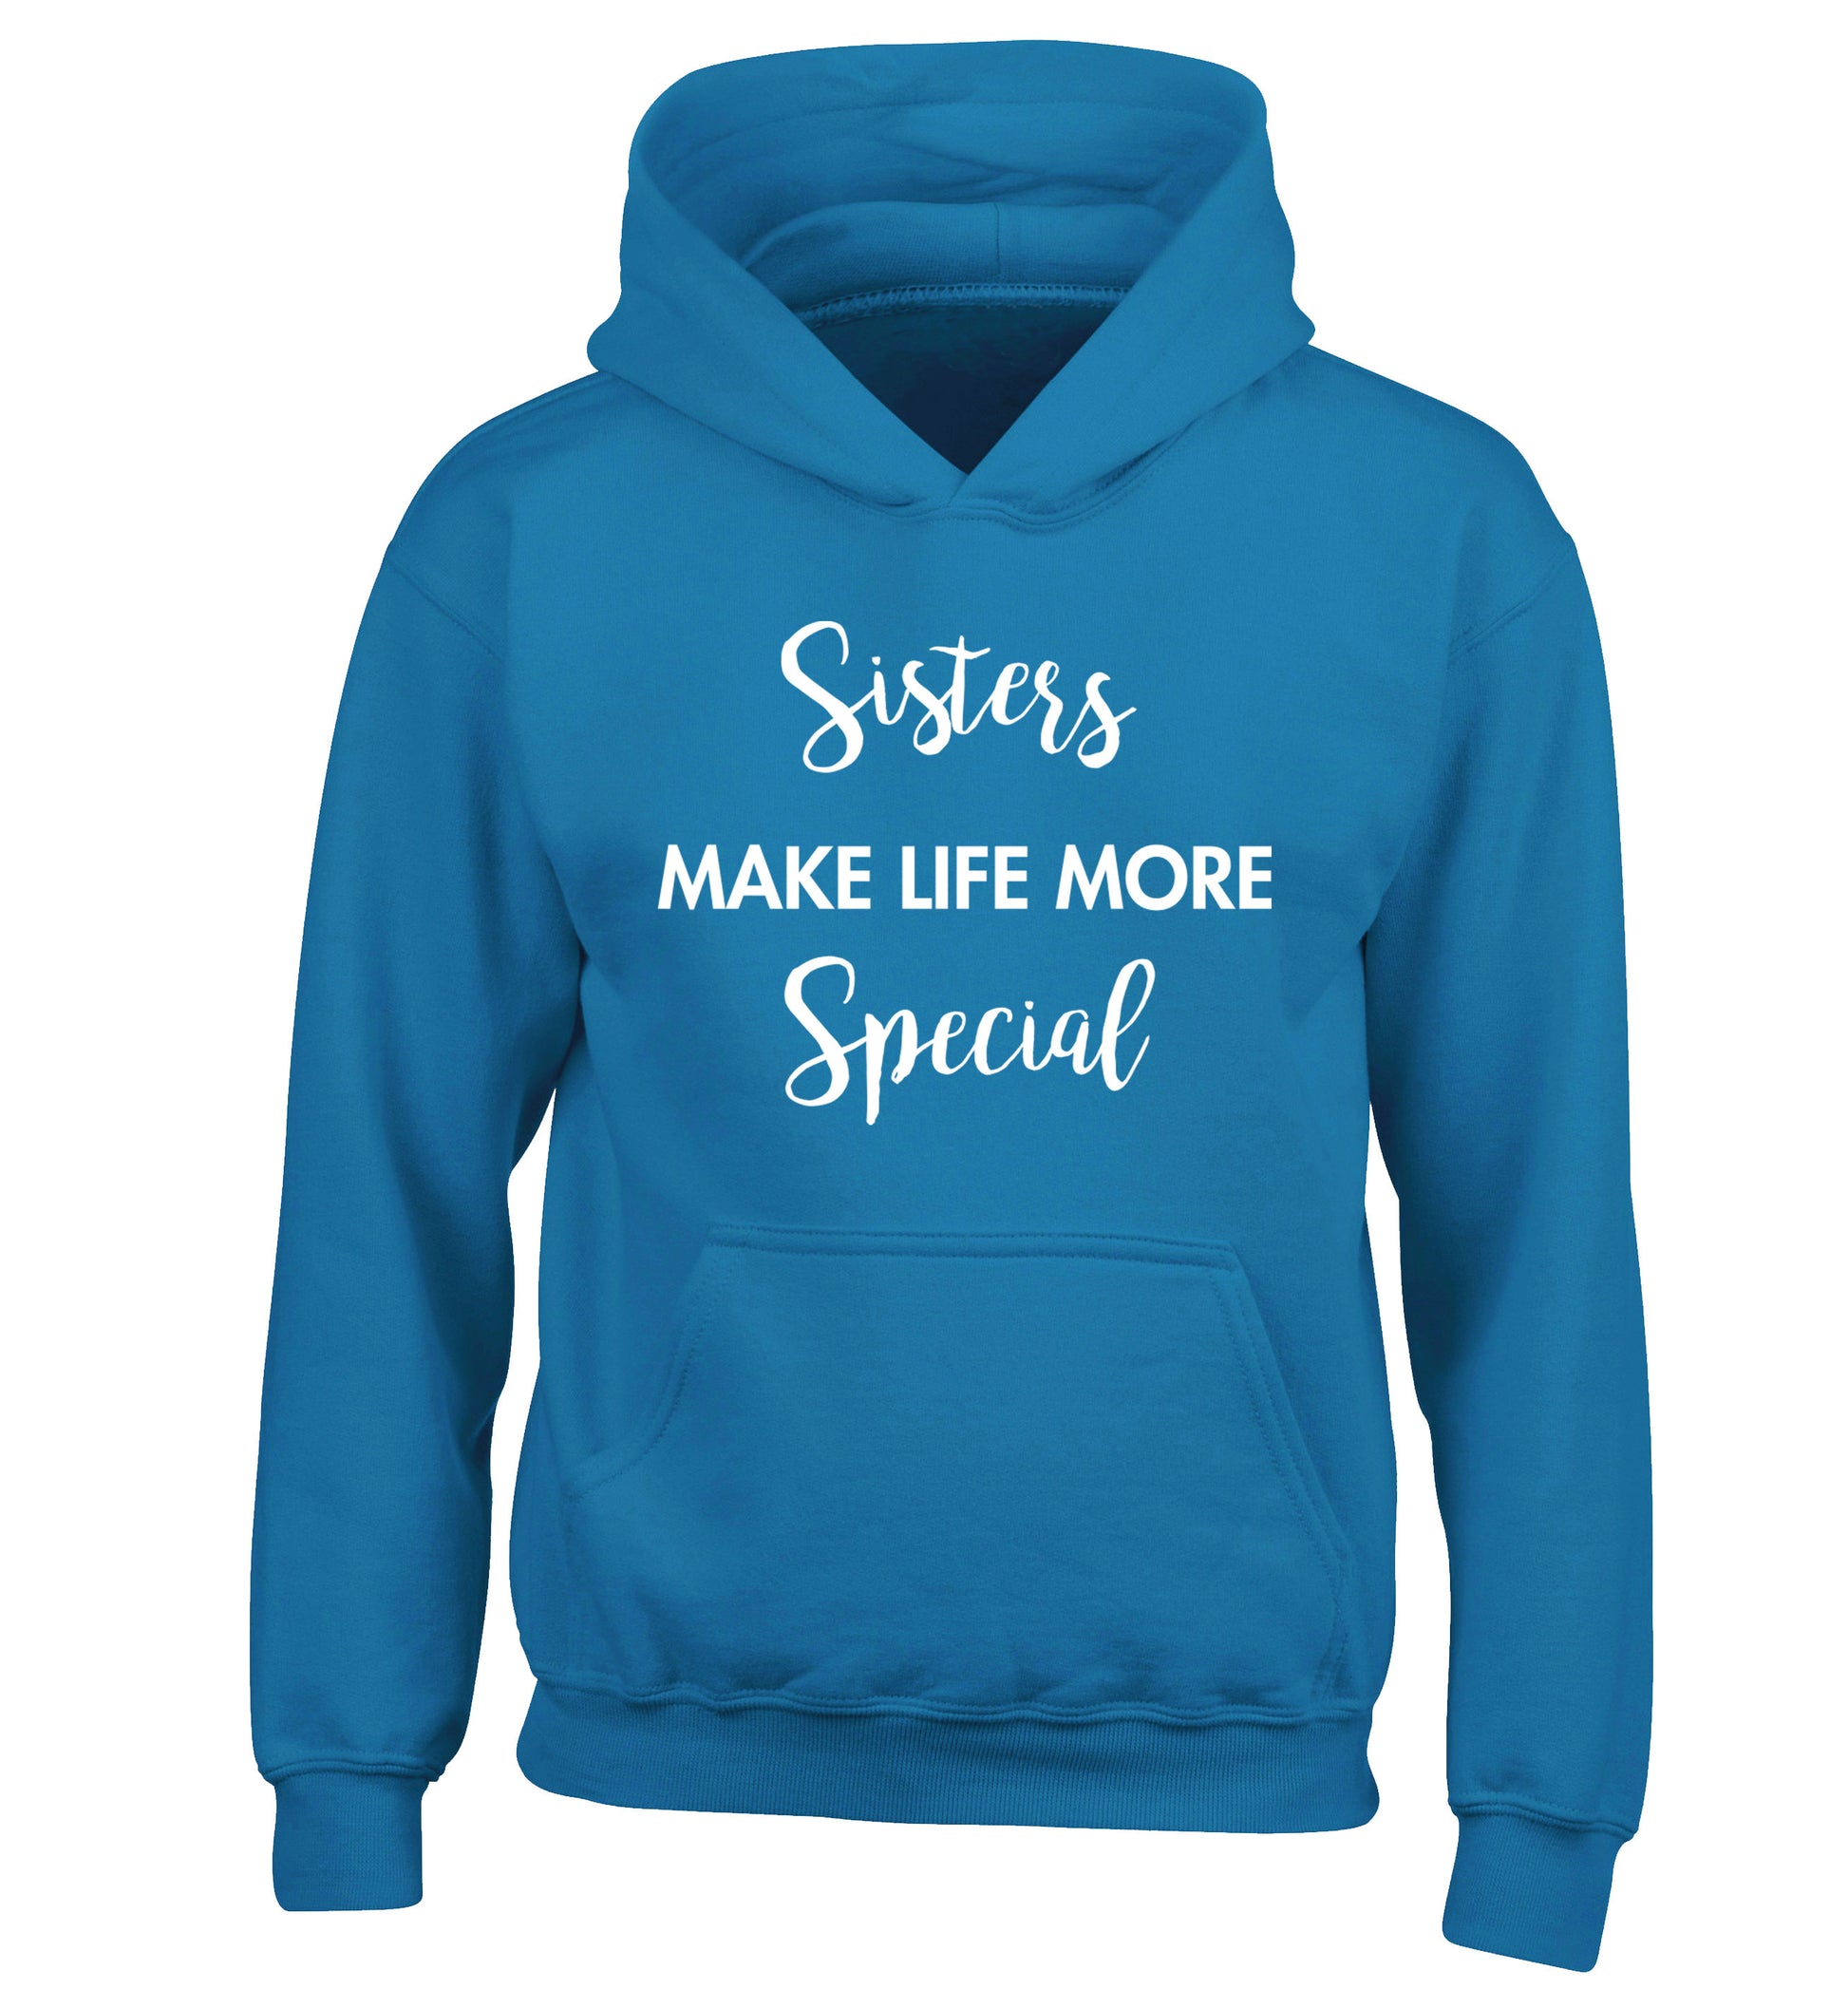 Sisters make life more special children's blue hoodie 12-14 Years